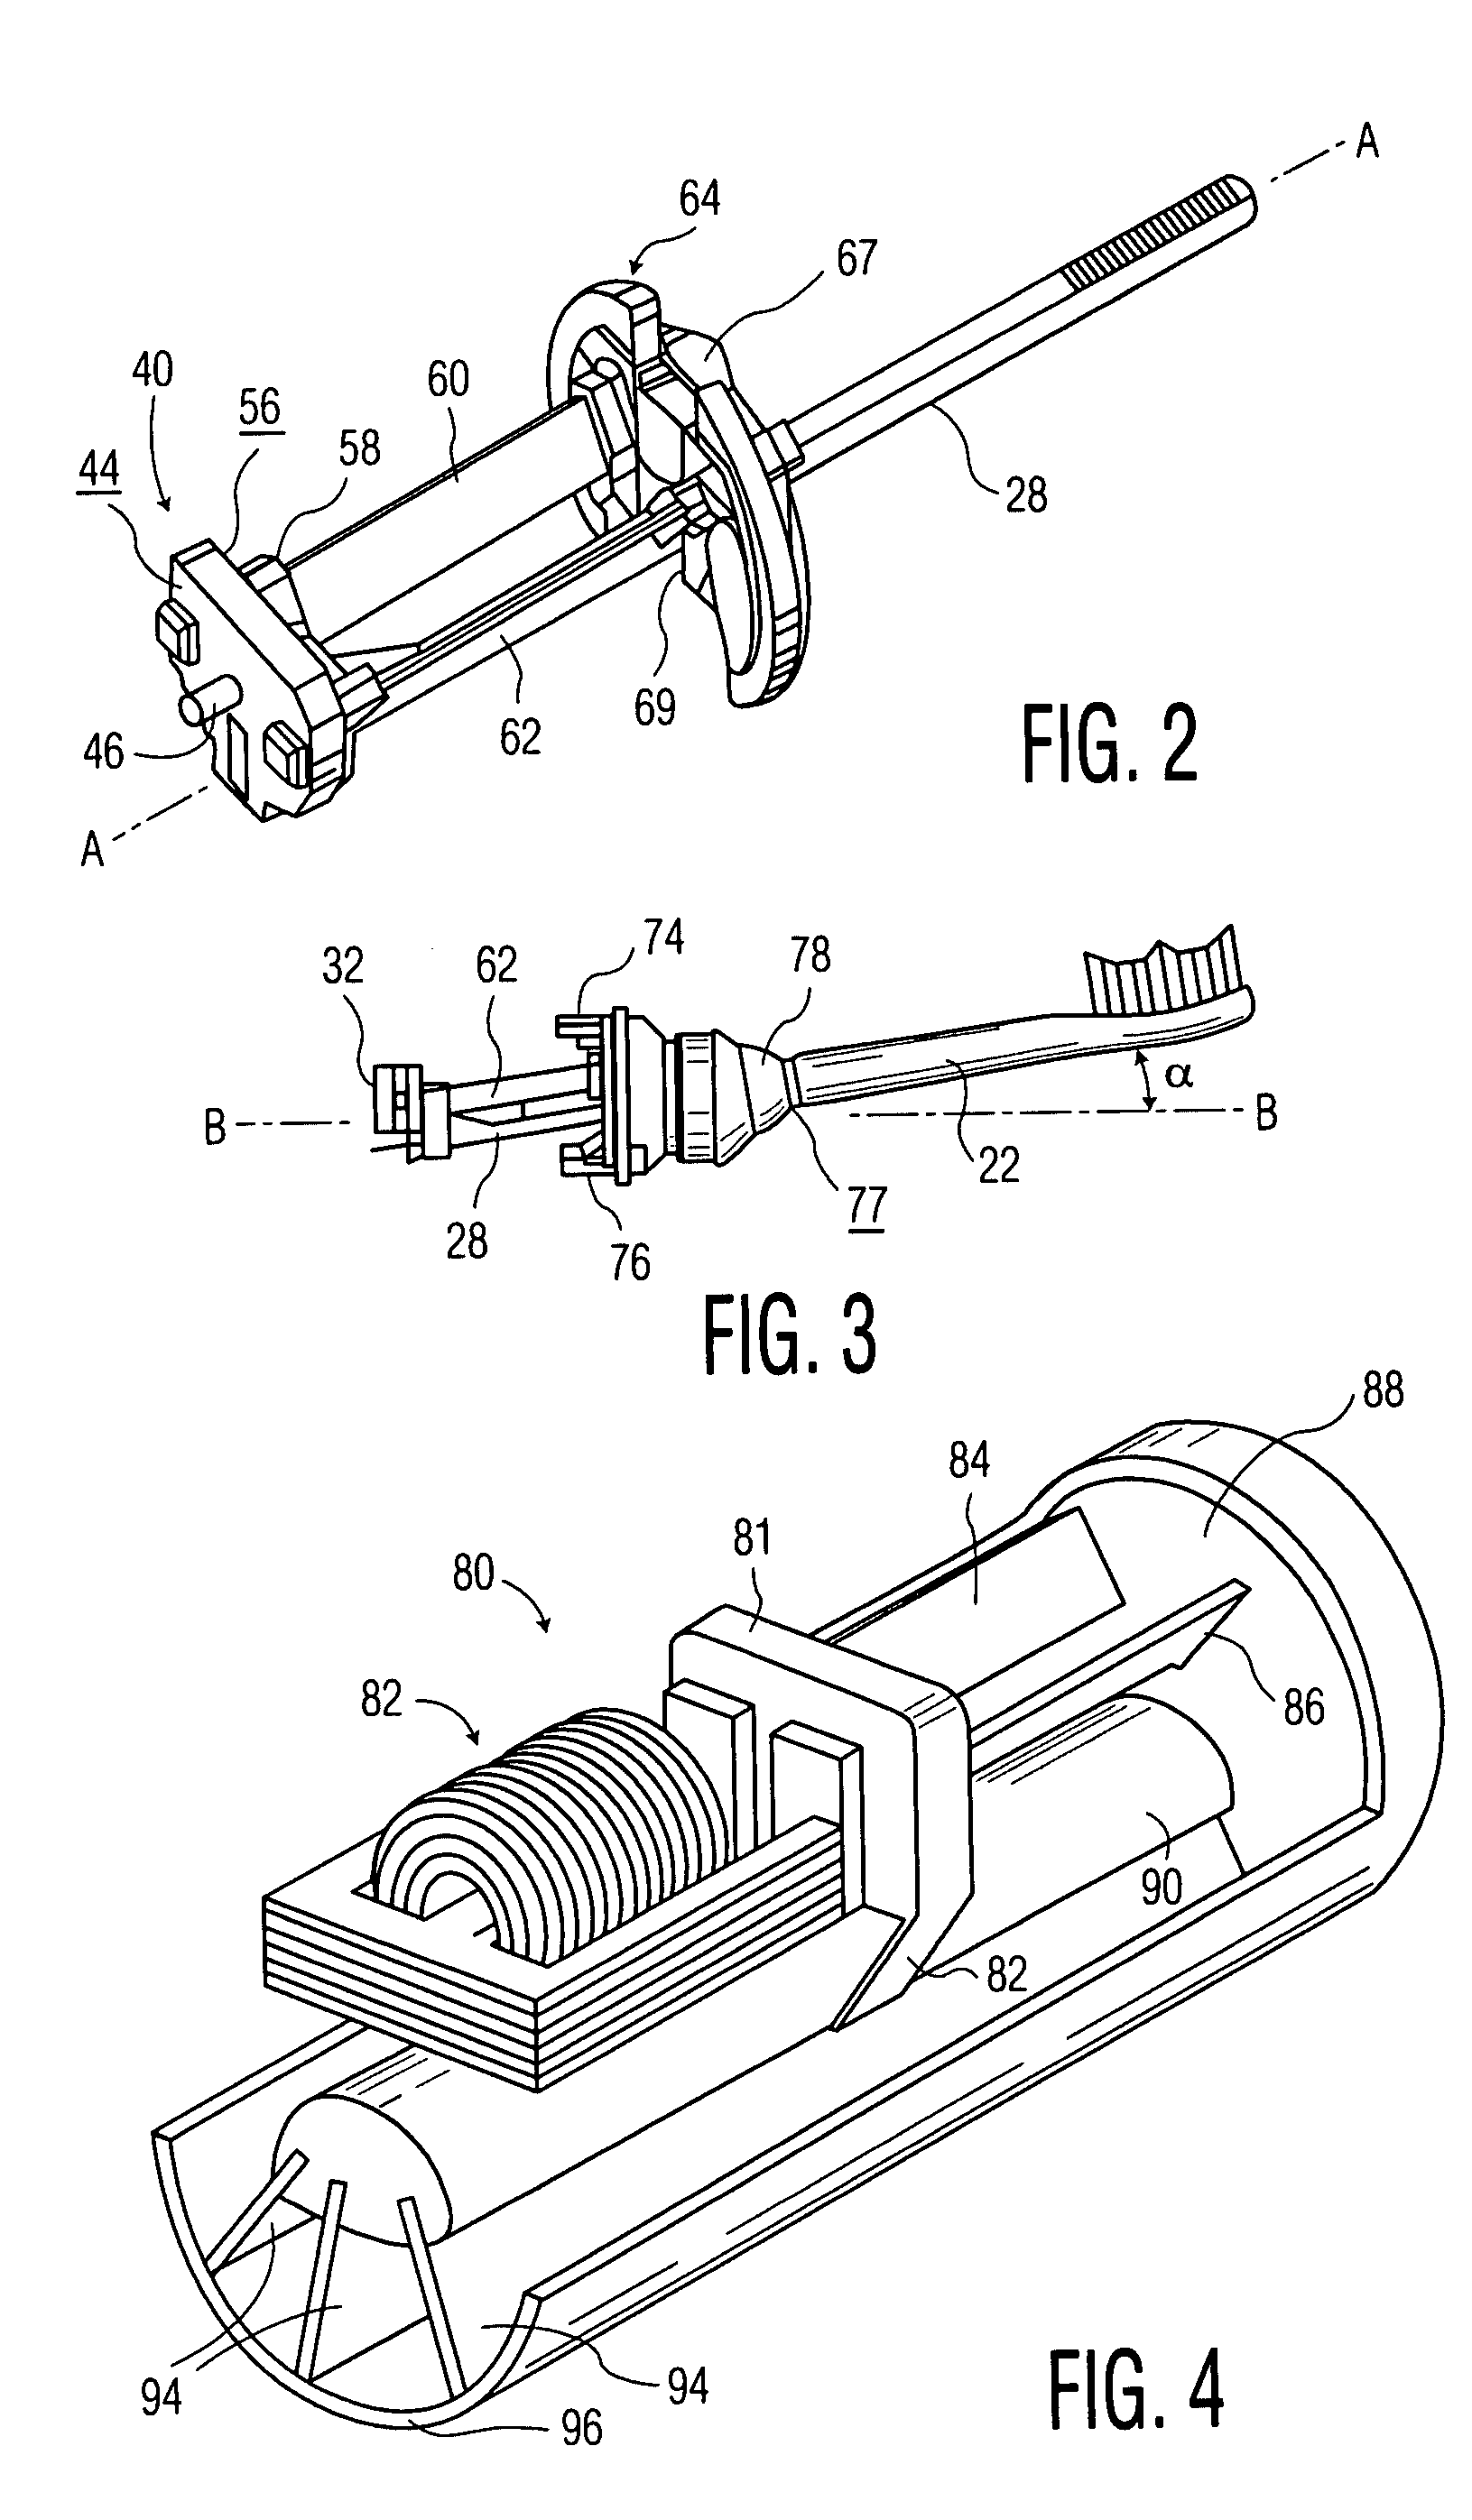 Apparatus for converting side-to-side driving motion to rotational motion with a spring assembly and system for tuning the spring assembly